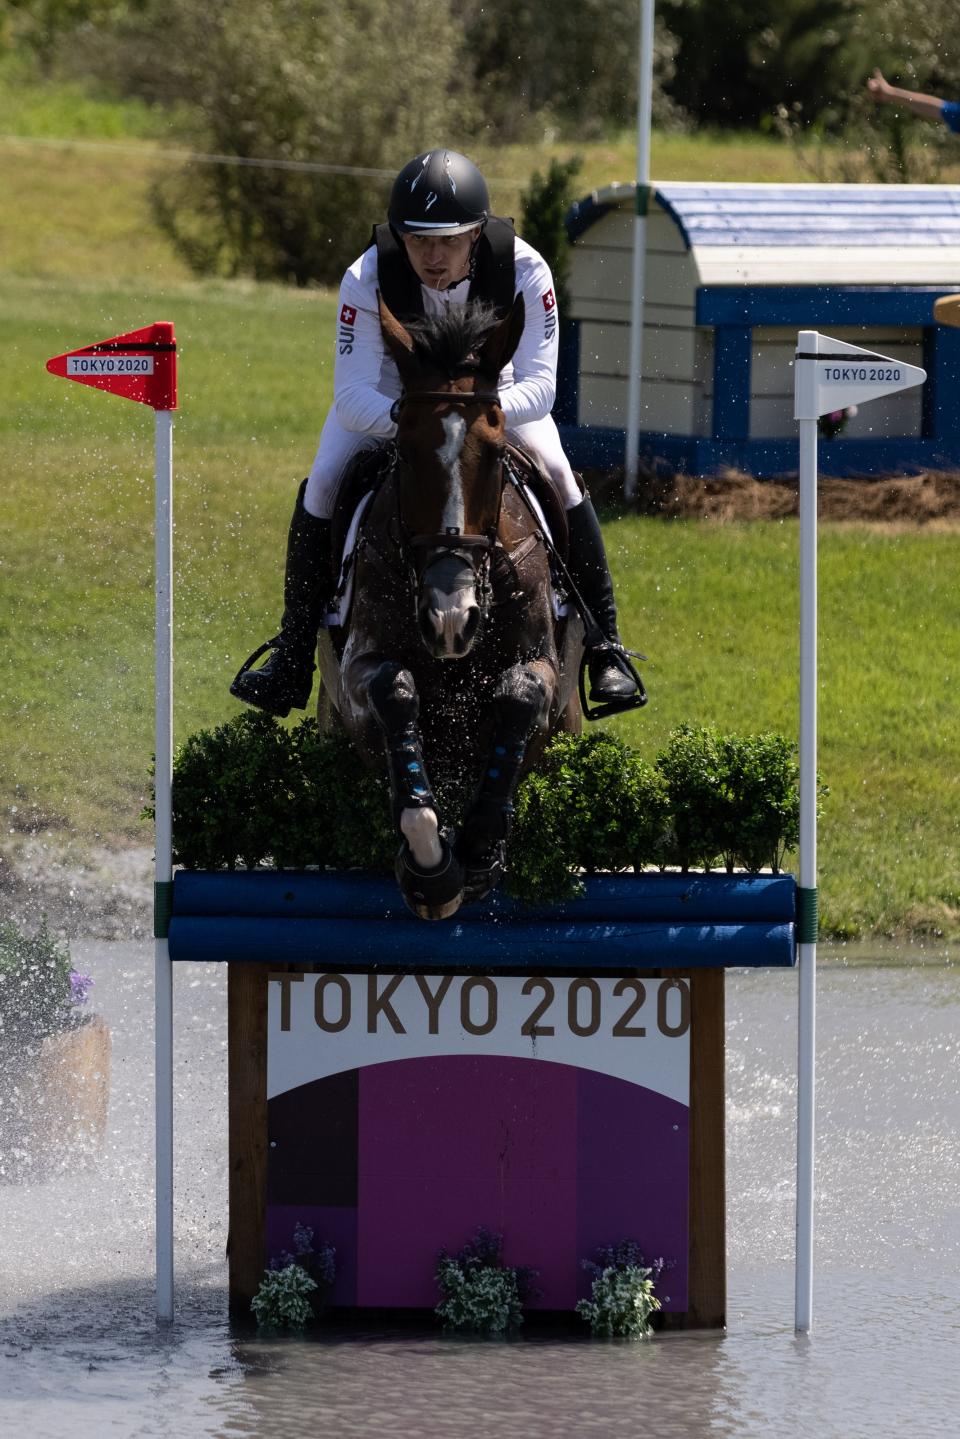 <p>Switzerland's Robin Godel riding Jet Set competes in the equestrian's eventing team and individual cross country during the Tokyo 2020 Olympic Games at the Sea Forest Cross Country Course in Tokyo on August 1, 2021. (Photo by Yuki IWAMURA / AFP) (Photo by YUKI IWAMURA/AFP via Getty Images)</p> 